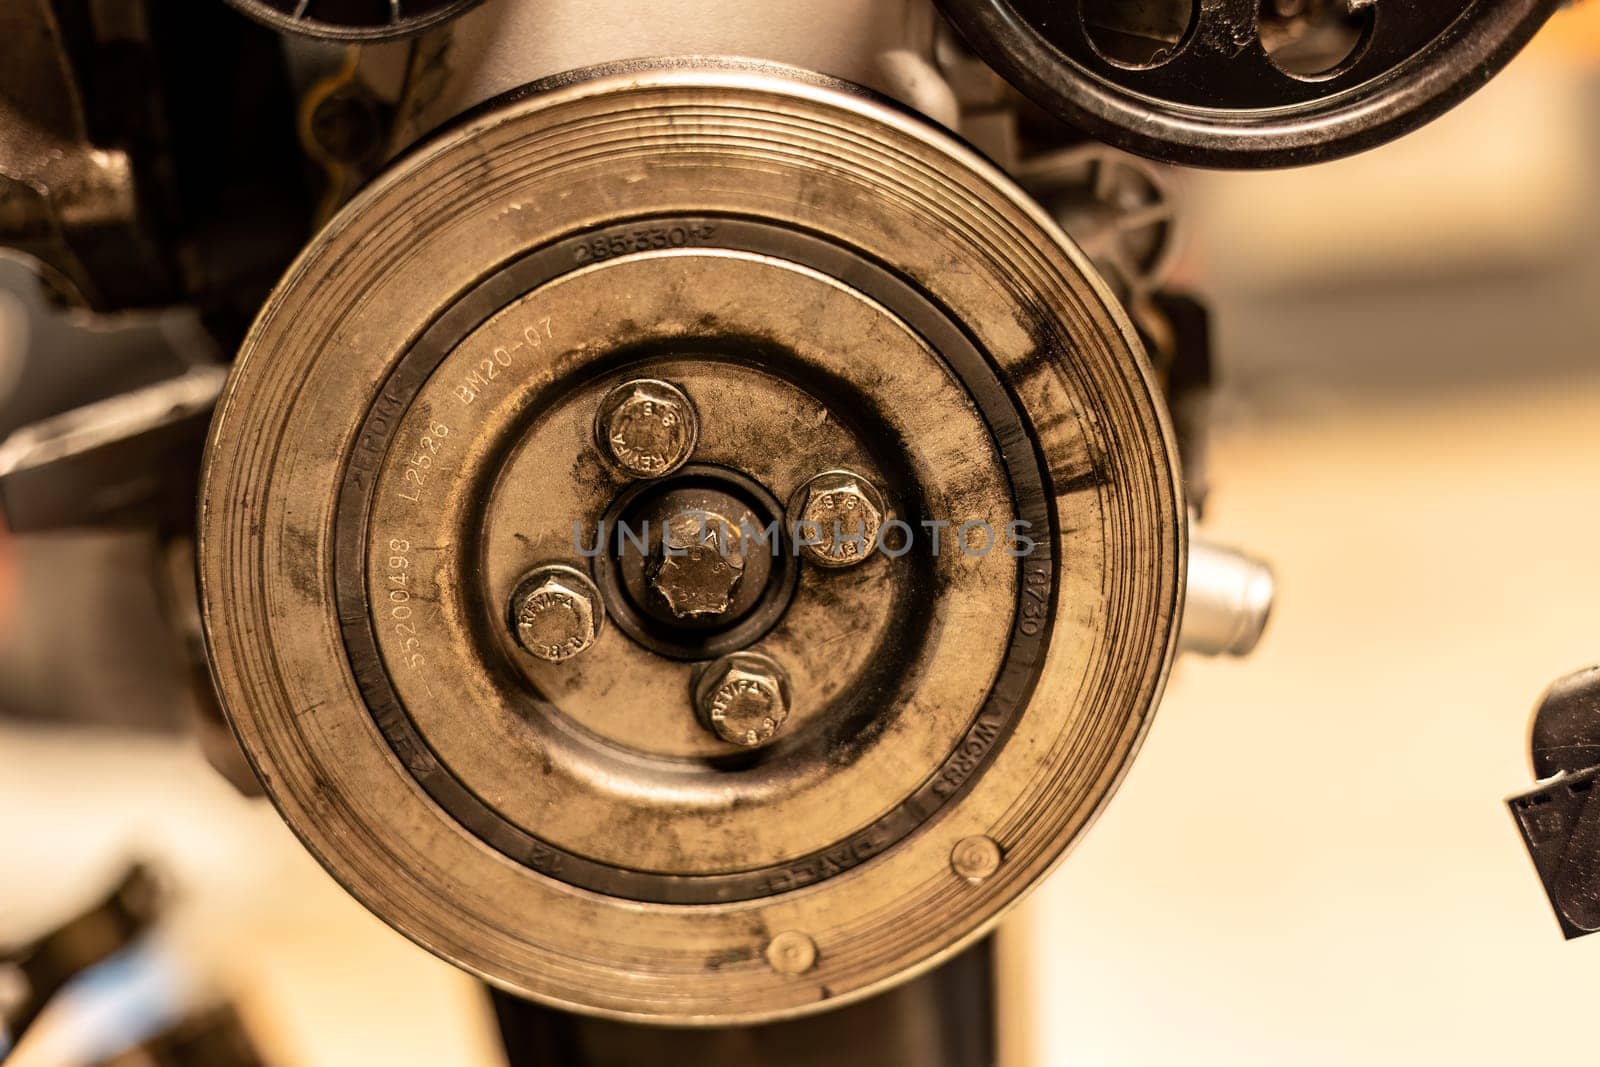 Photo focusing on the intricate pulleys of a car engine by pippocarlot